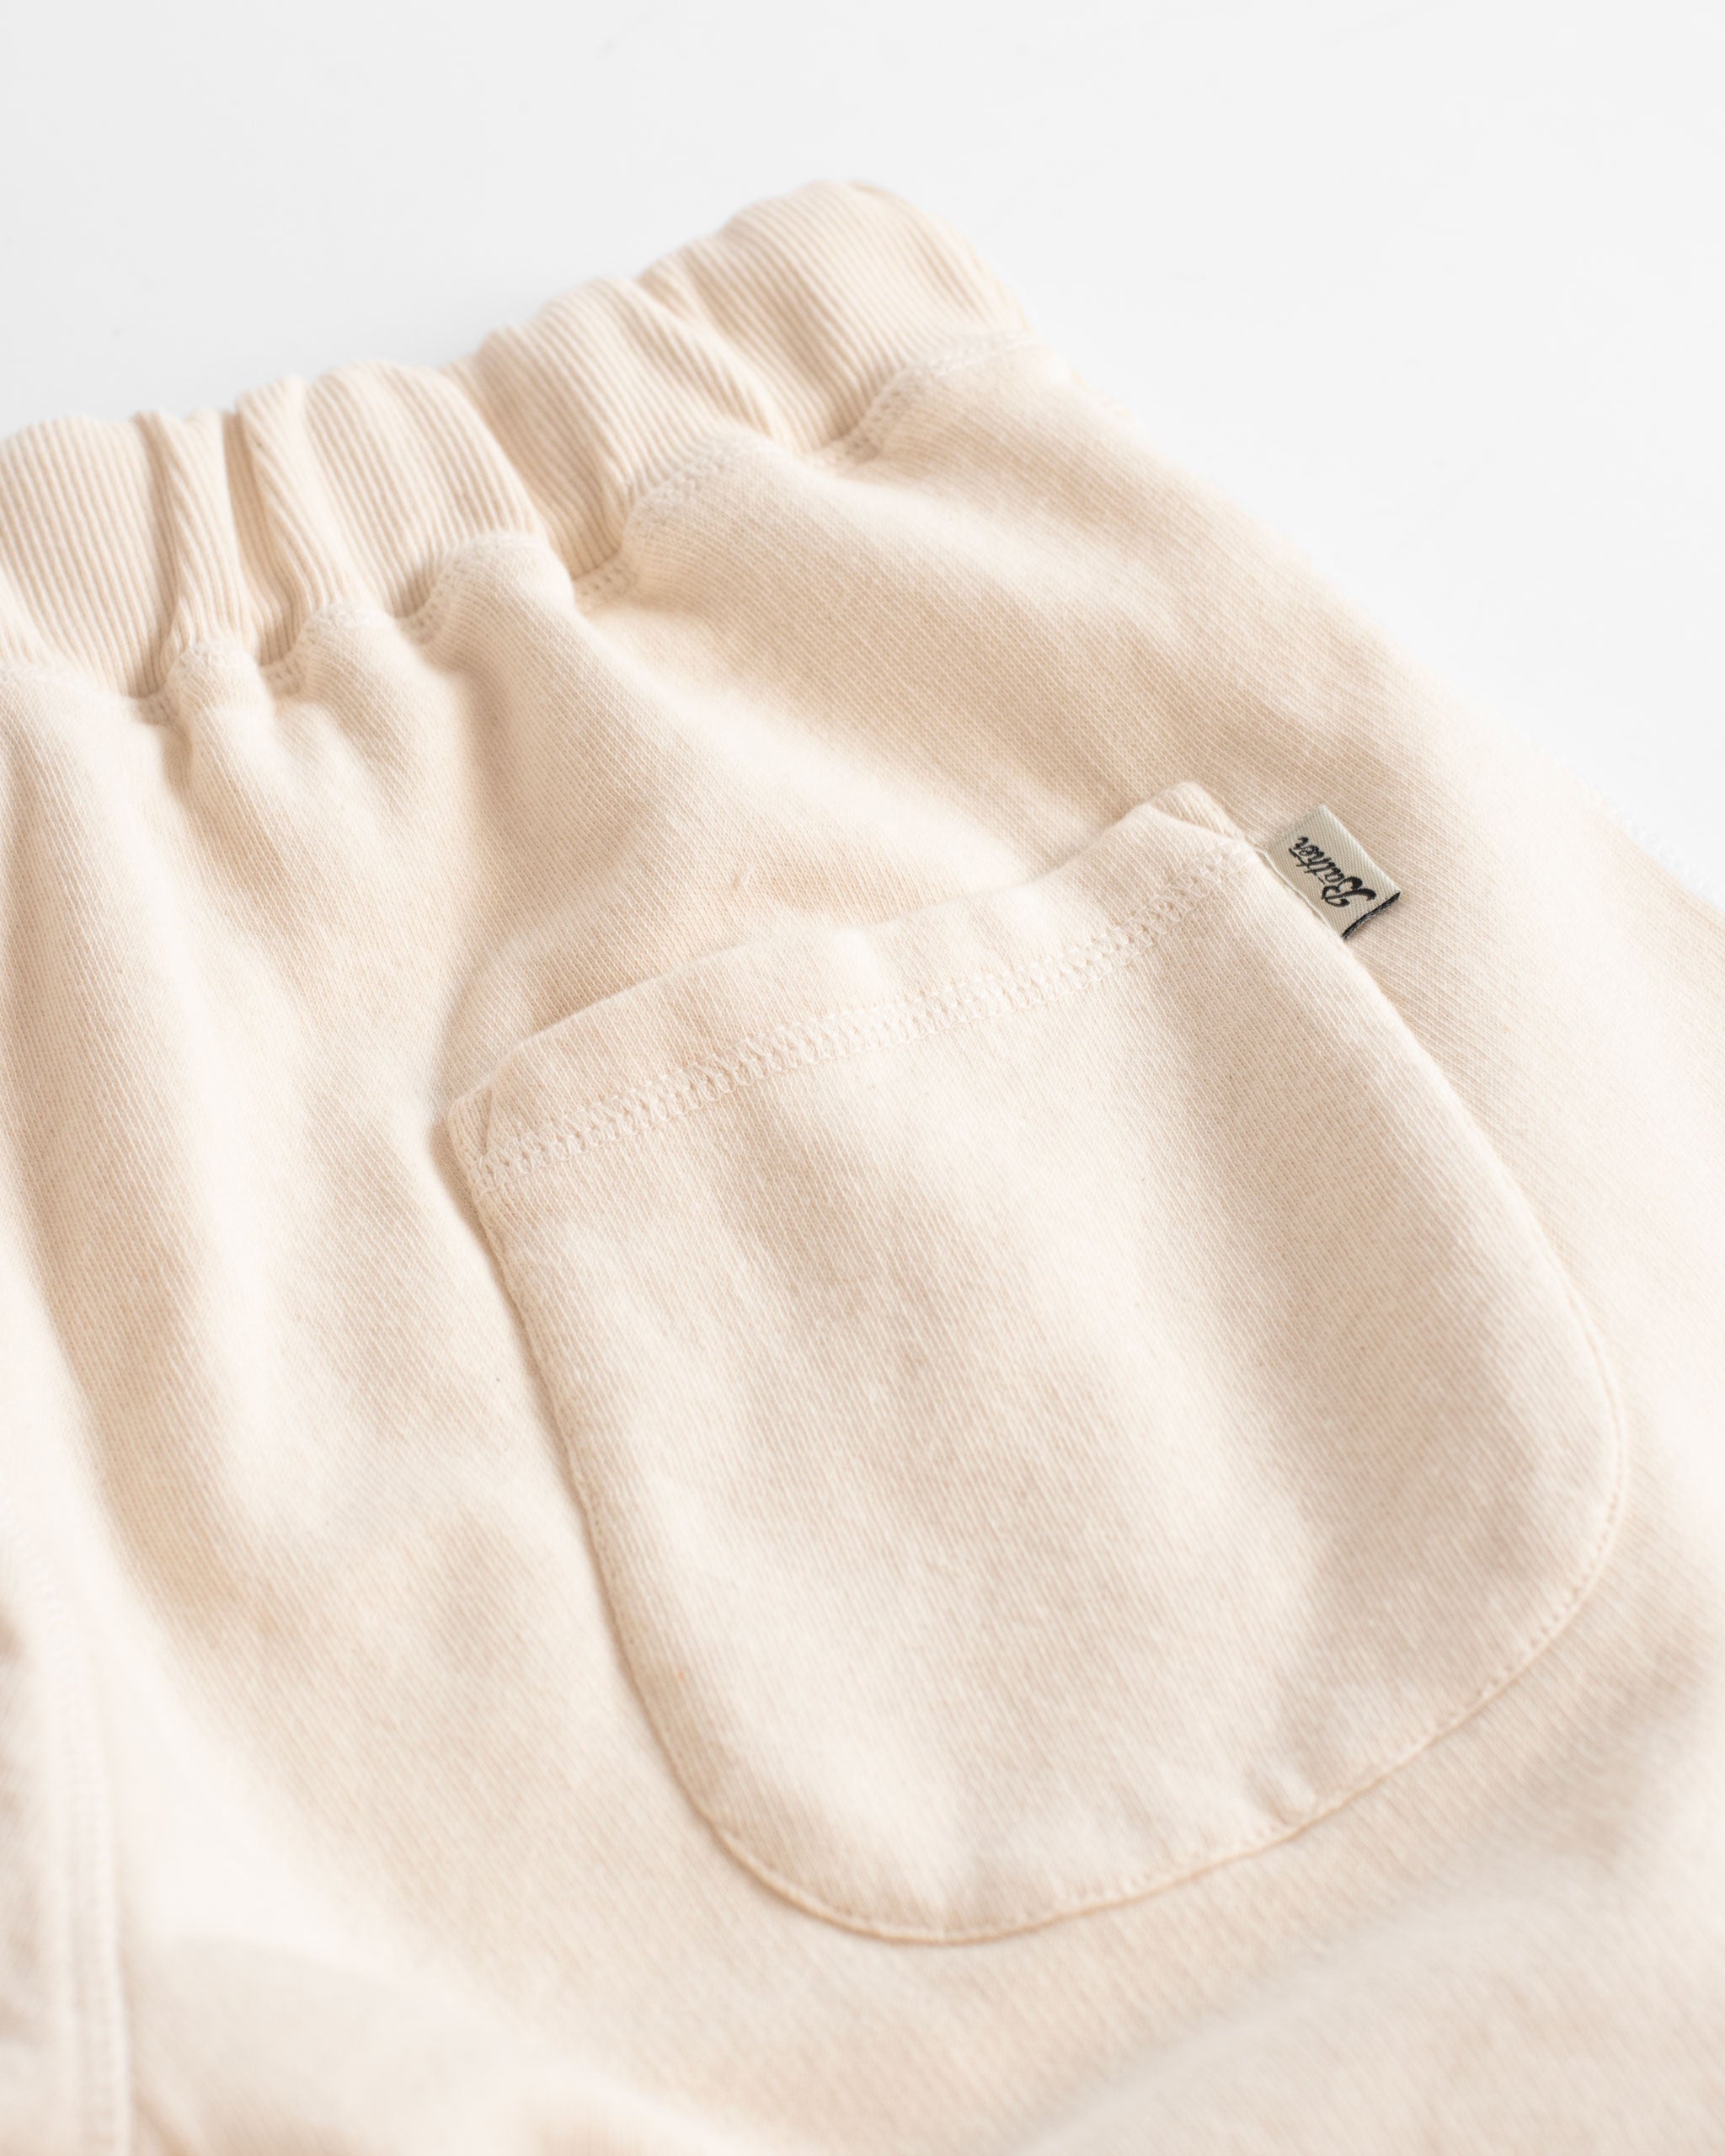 back pocket shot of Natural ivory french terry cotton Sweat Shorts